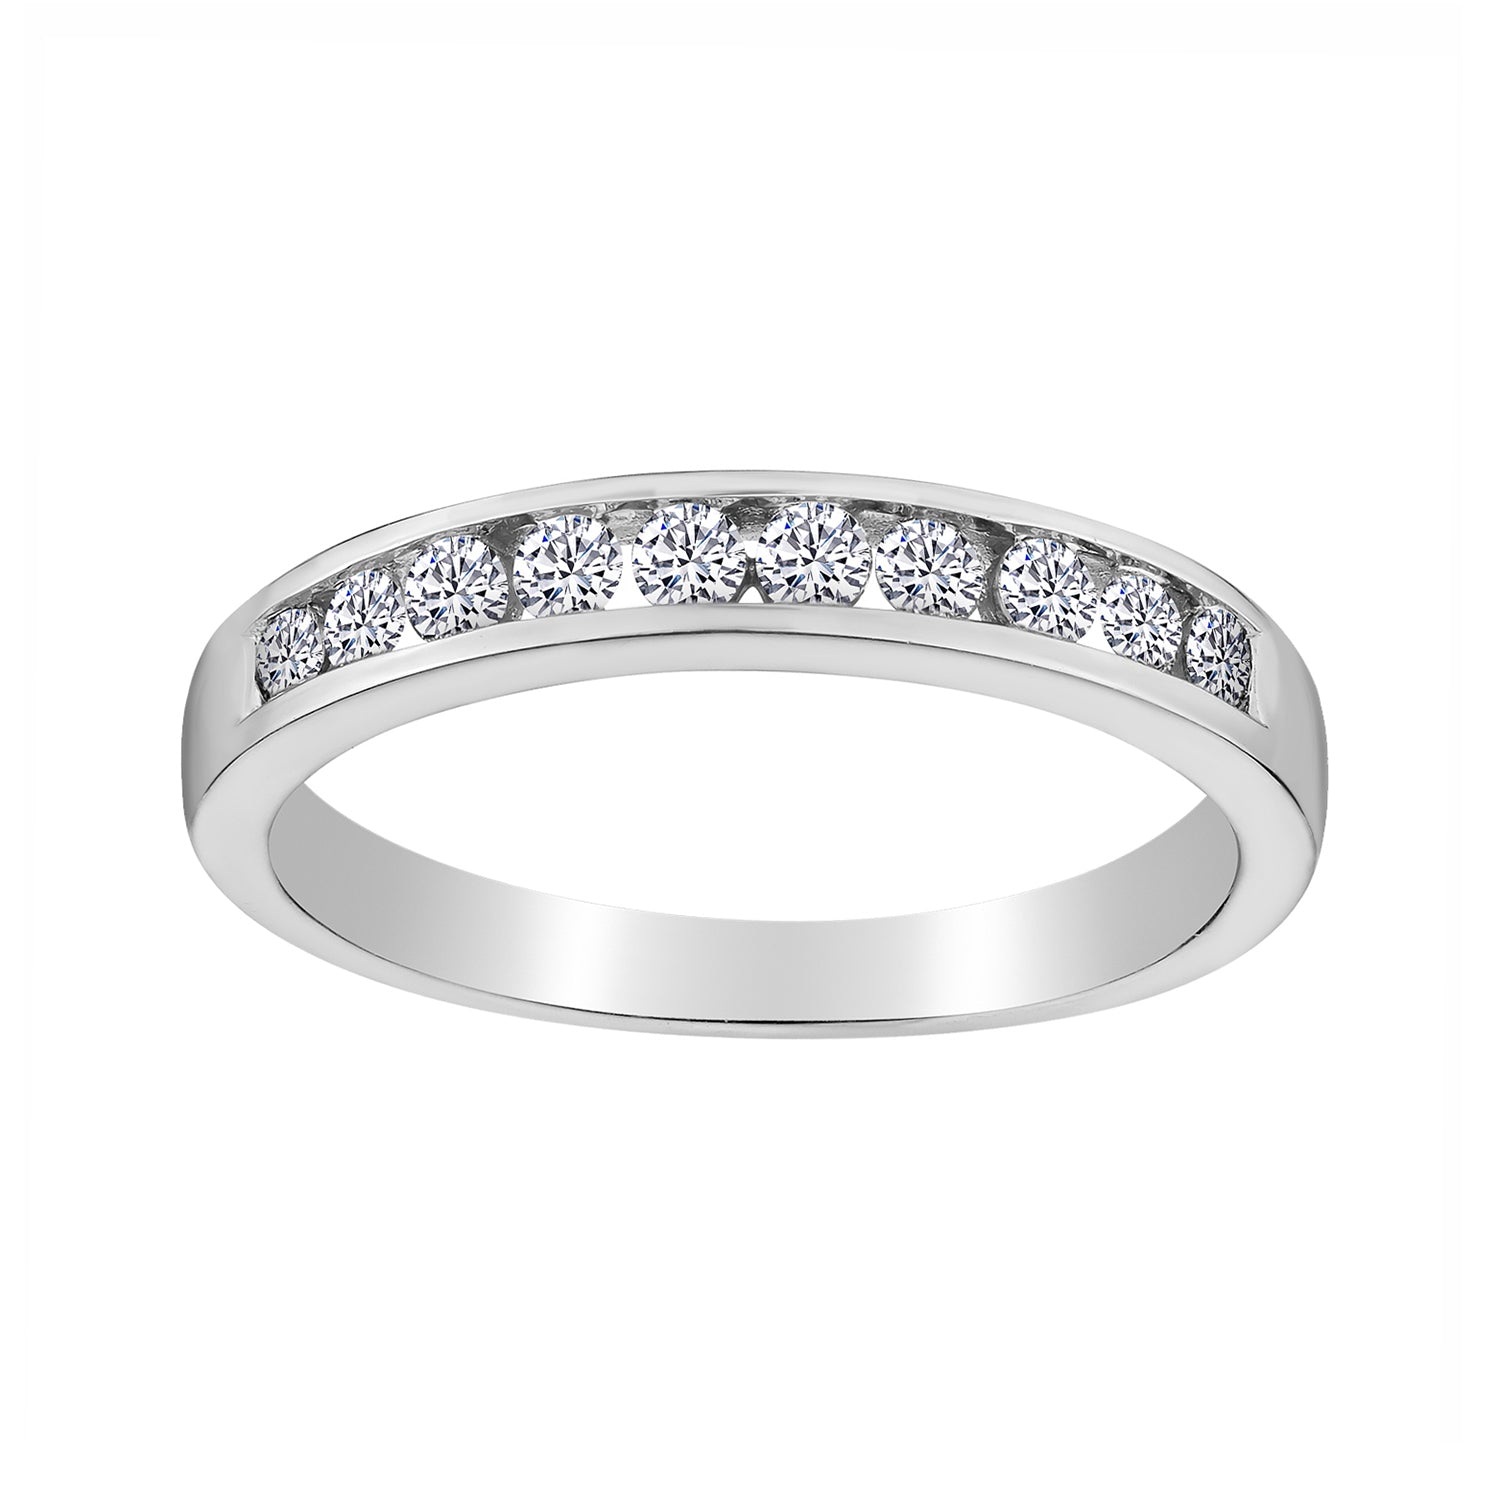 .33 Carat of Diamonds Ring Band, 10kt White Gold….....................NOW